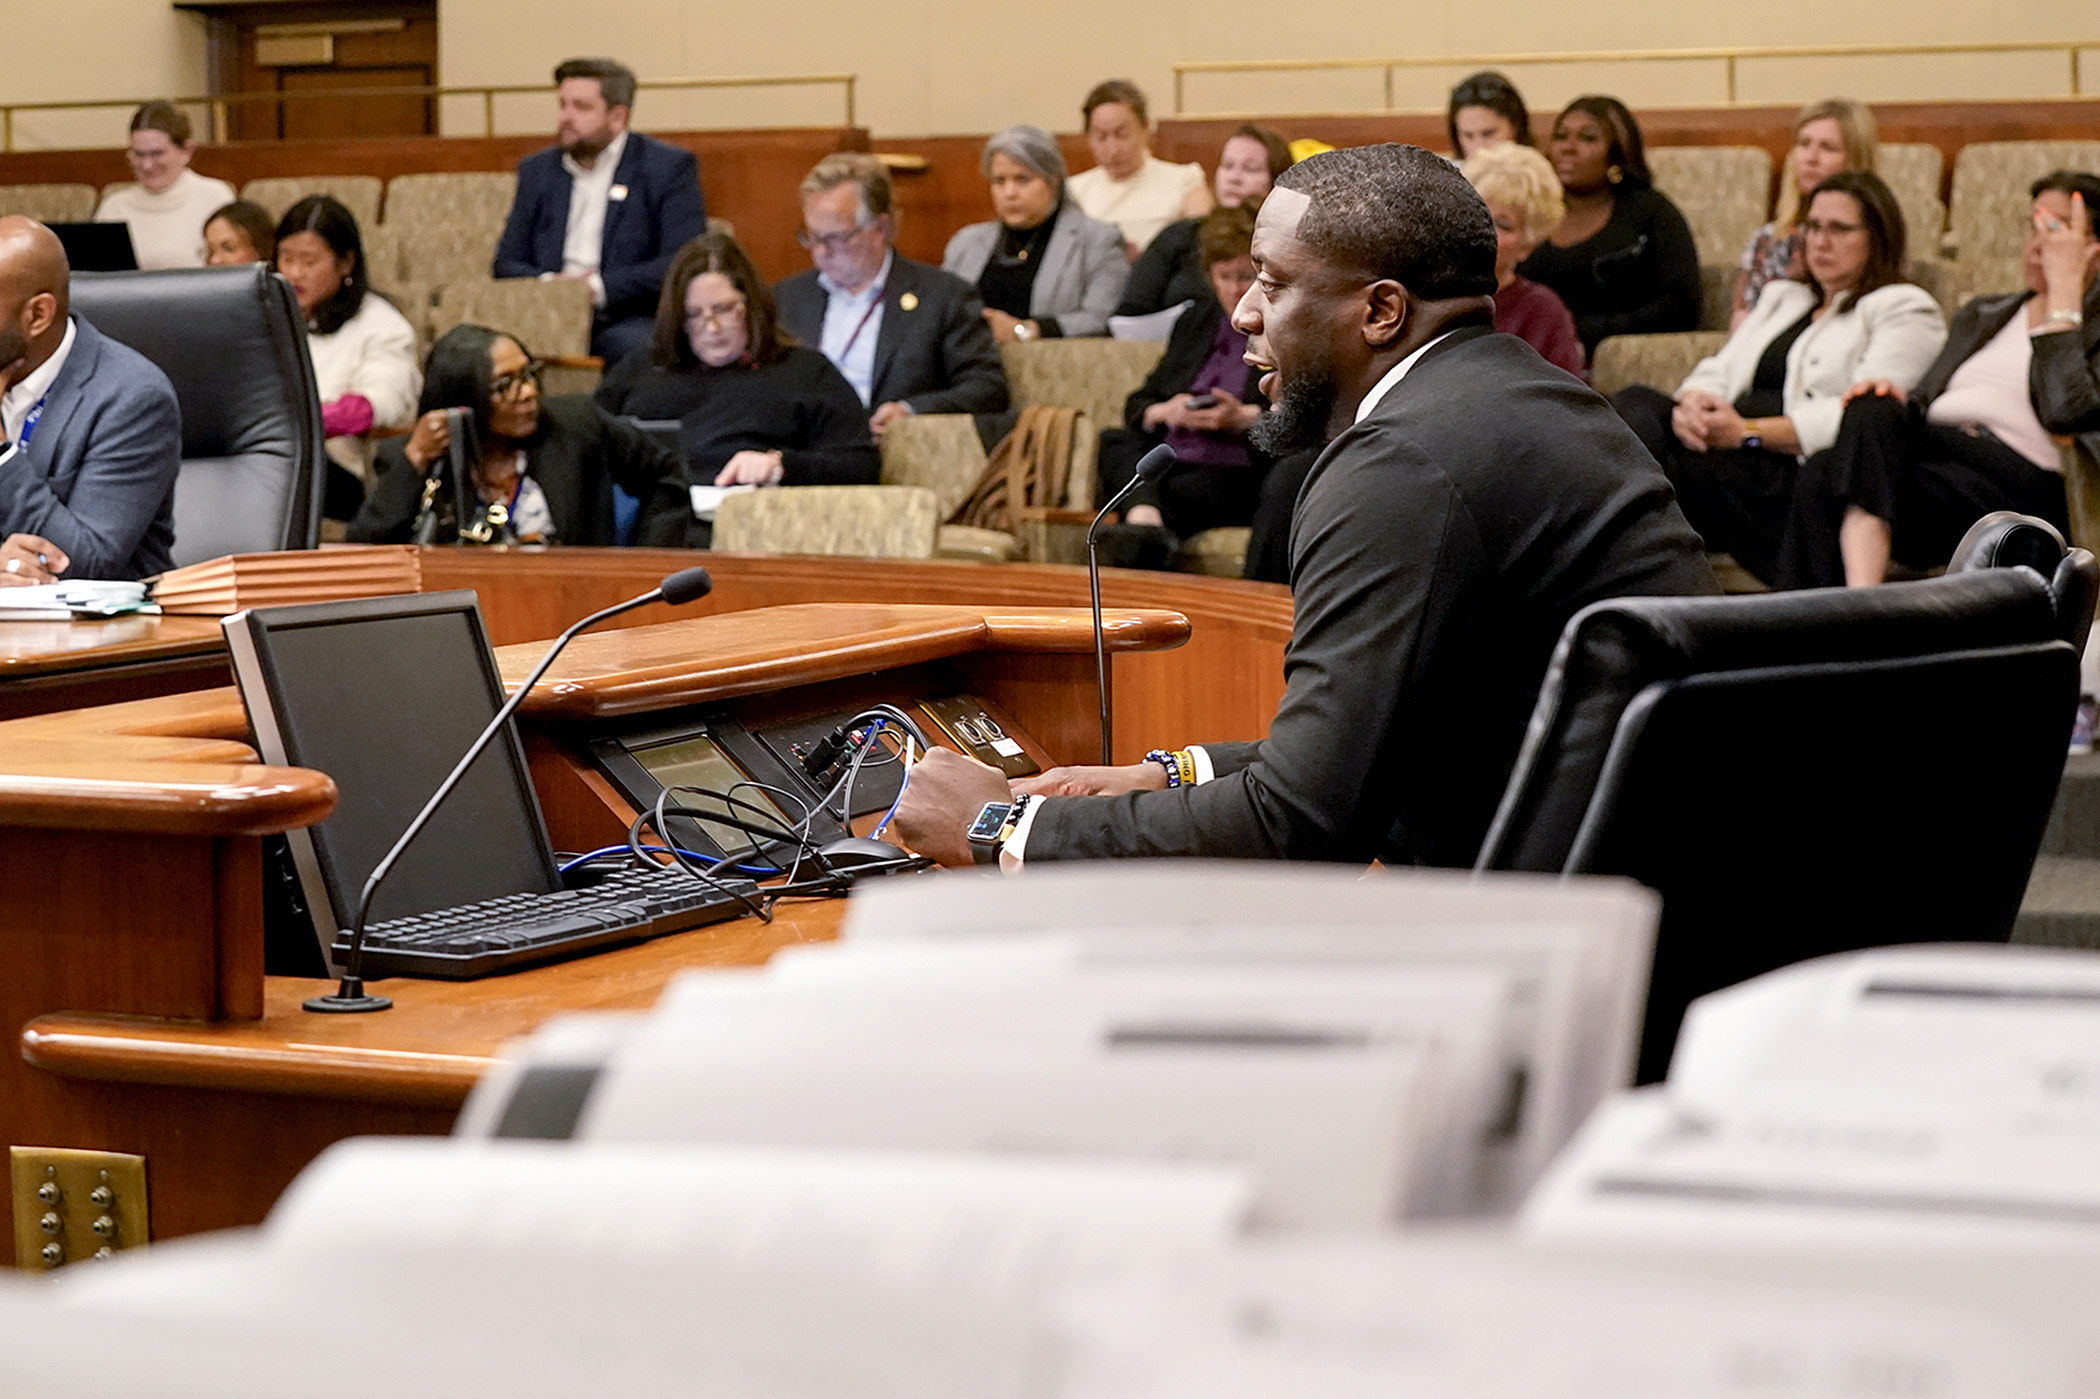 Sam Ndely, executive board director of the Minnesota Black Chamber of Commerce, testifies April 19 before the House Workforce Development Finance and Policy Committee regarding HF5205, the panel’s supplemental budget bill. (Photo by Michele Jokinen)